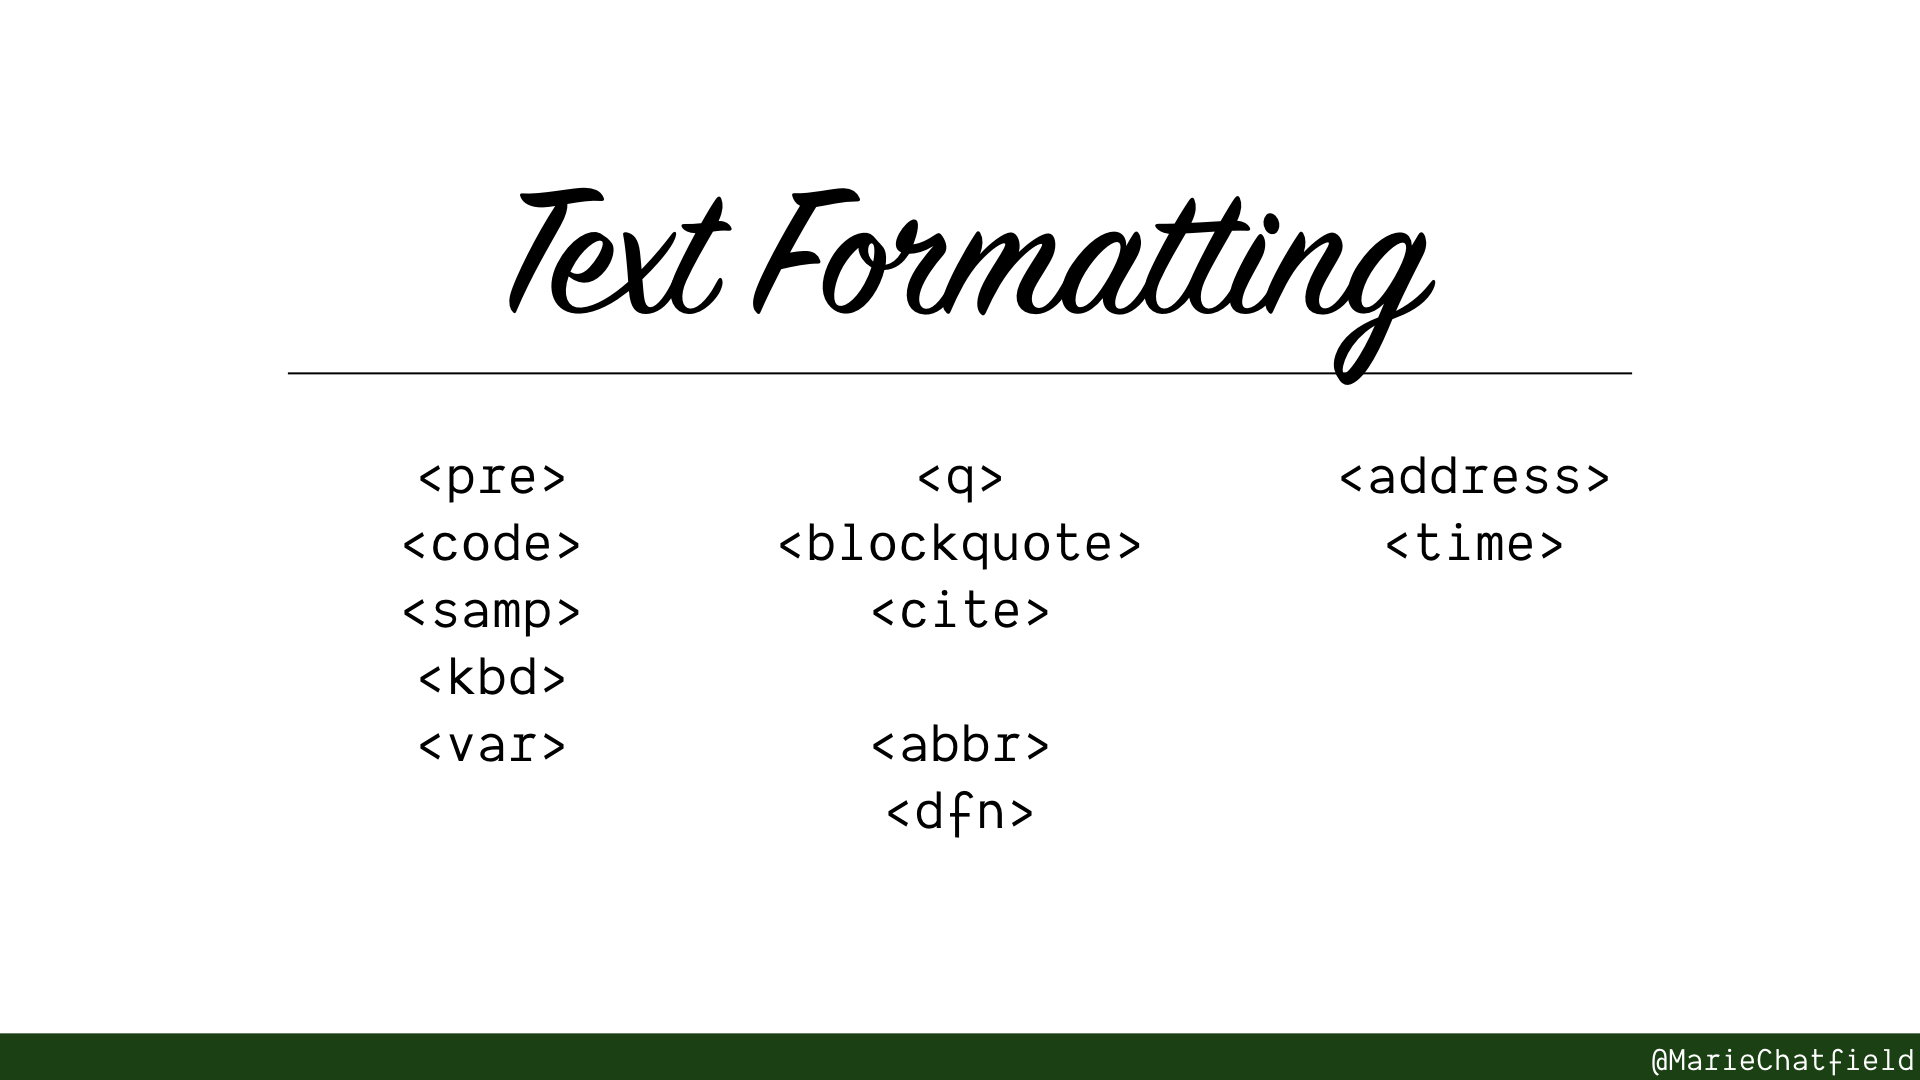 Slide of Text Formatting with HTML elements listed